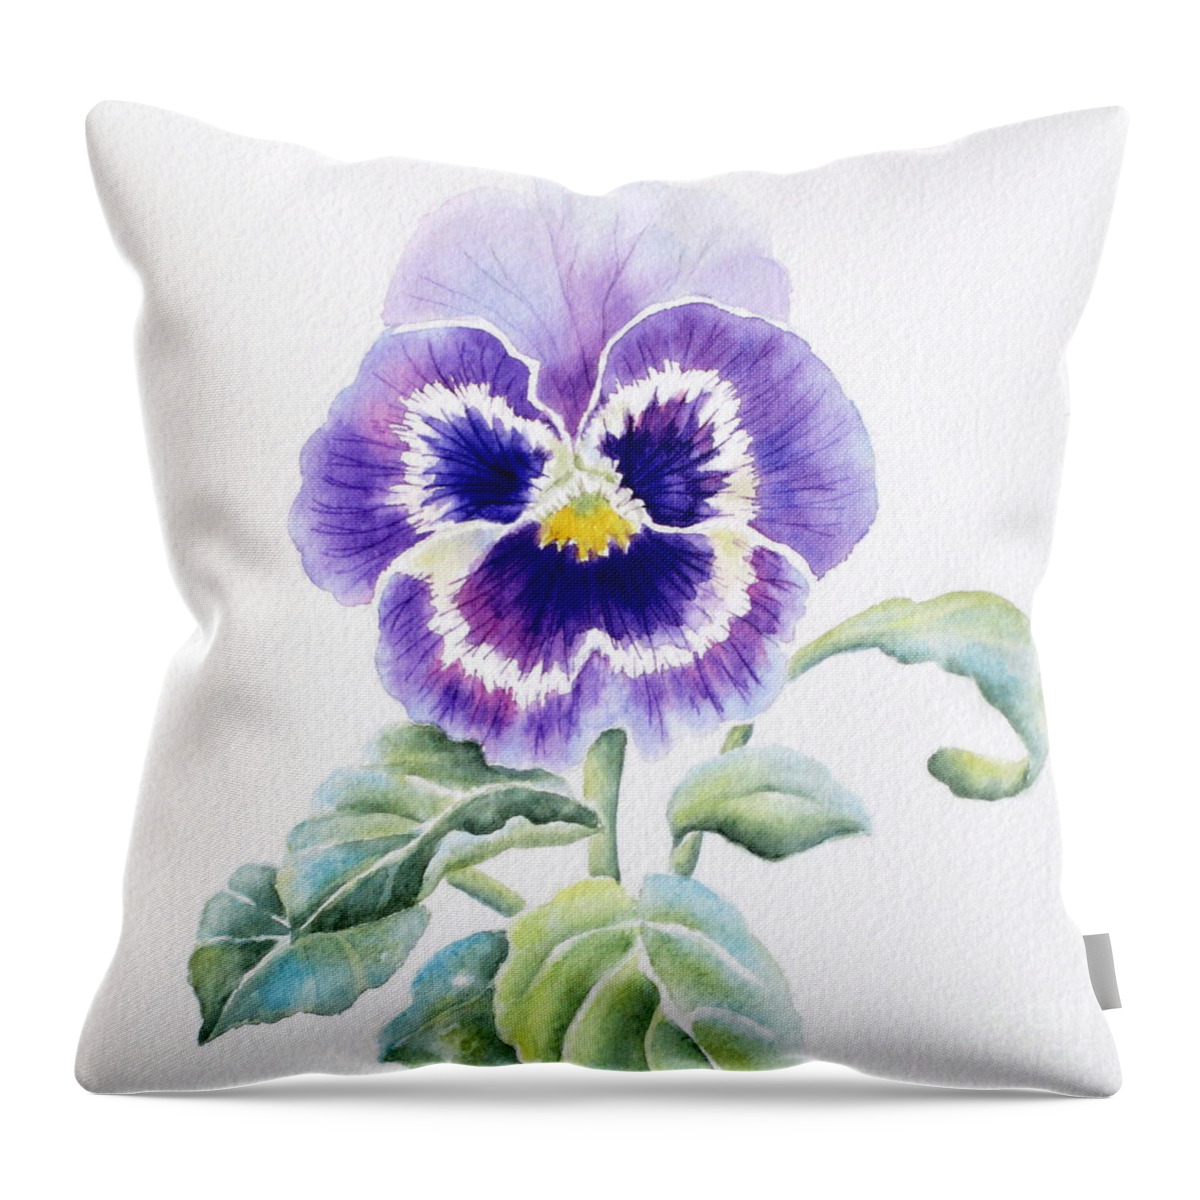 Pansy Throw Pillow featuring the painting Pansy by Deborah Ronglien